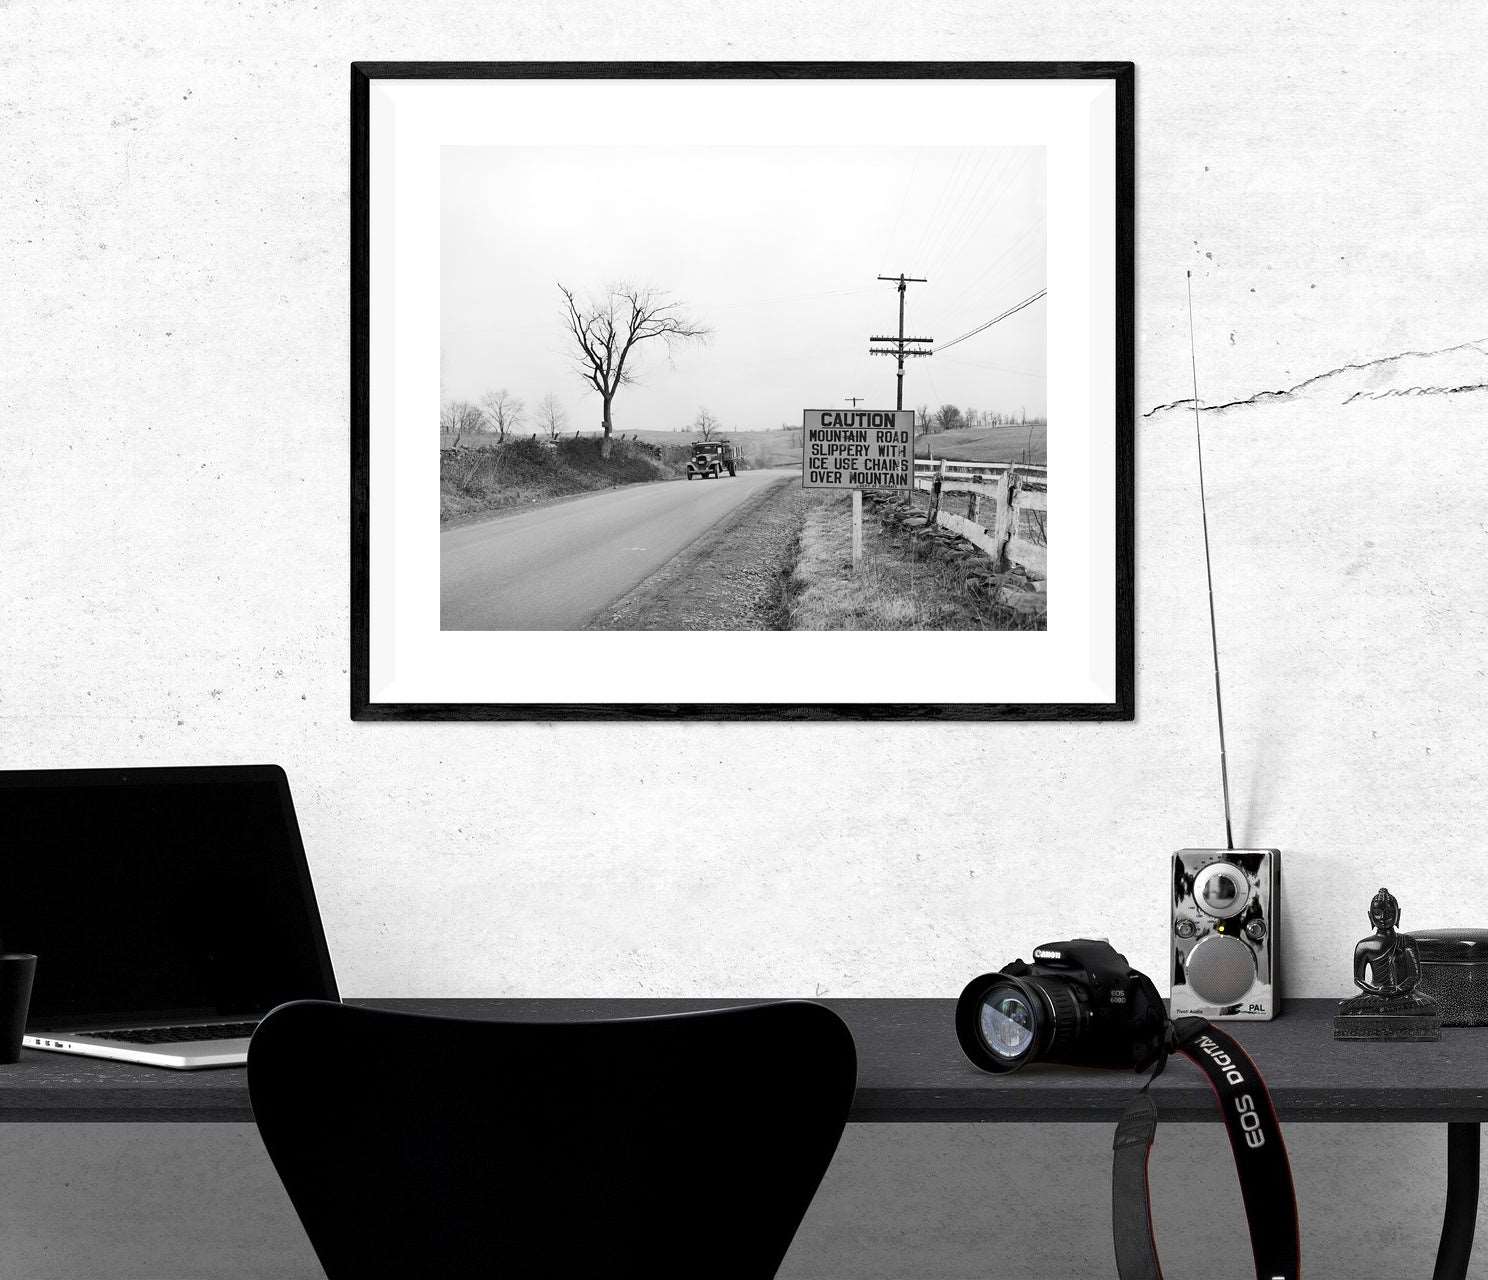 A framed paper print on the wall above a desk, featuring vintage photography of a car on the highway